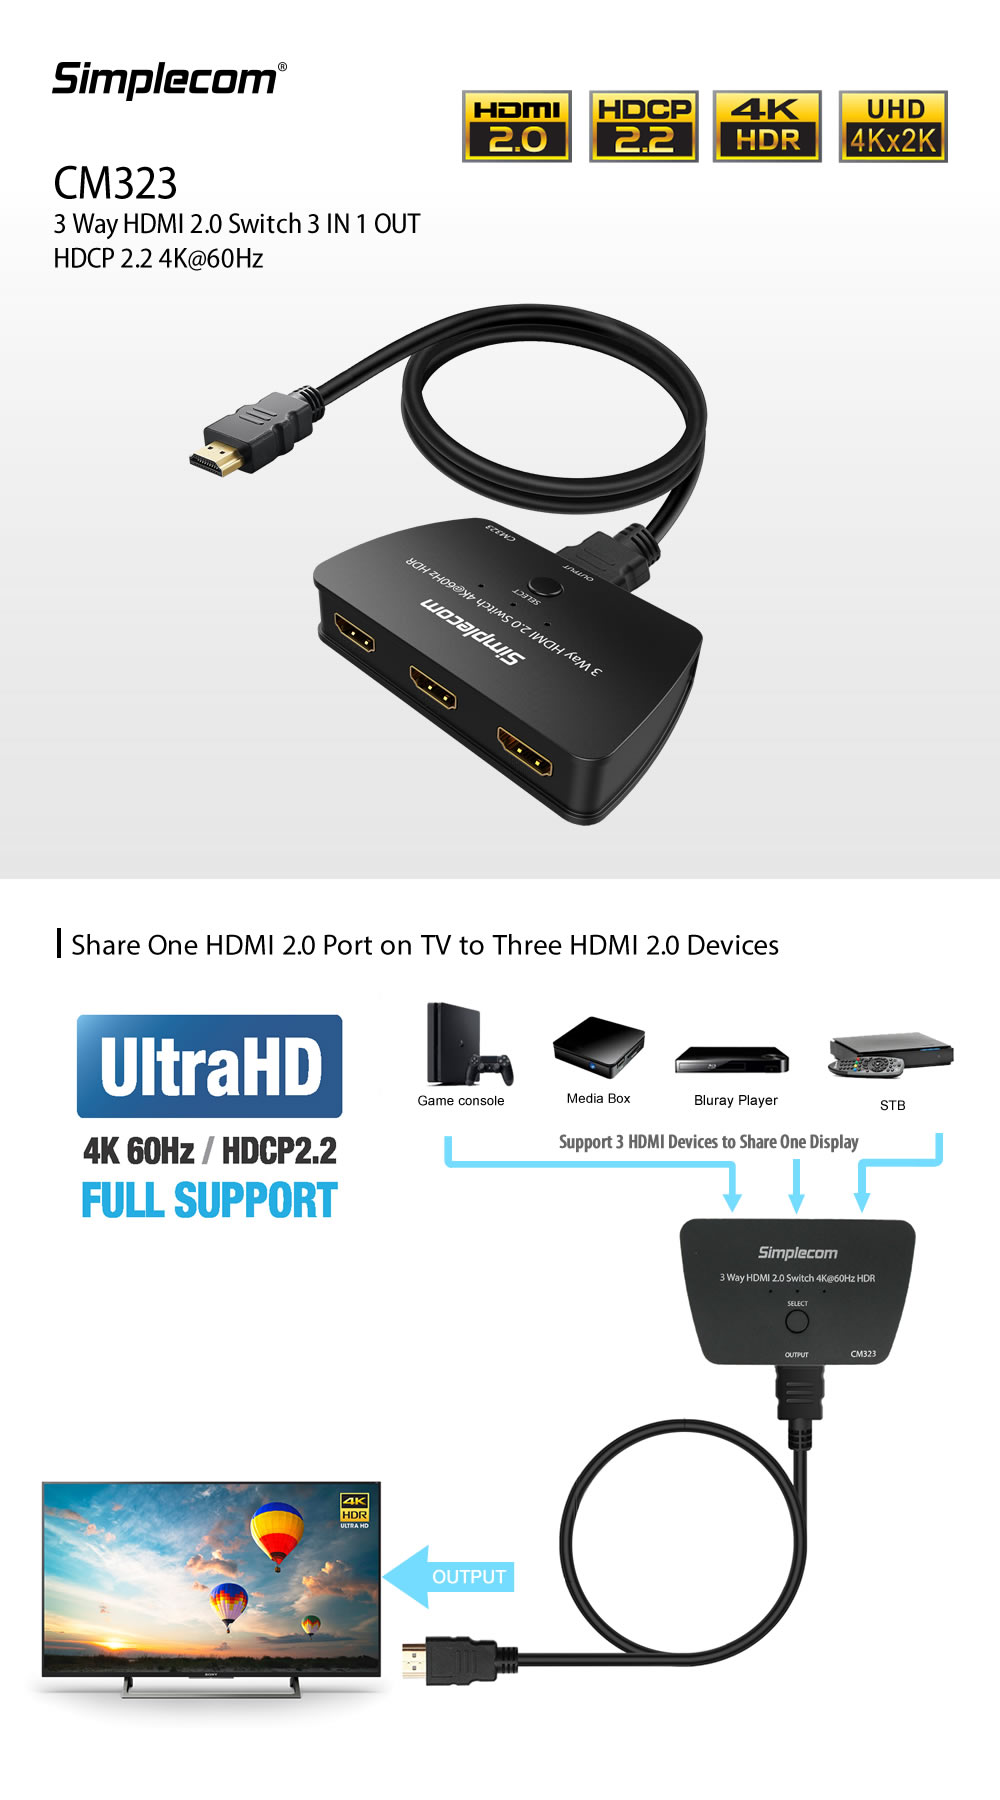 Simplecom CM323 3 Way HDMI 2.0 Switch 3 In 1 Out Splitter HDCP 2.2 4K @60Hz UHD HDR 1